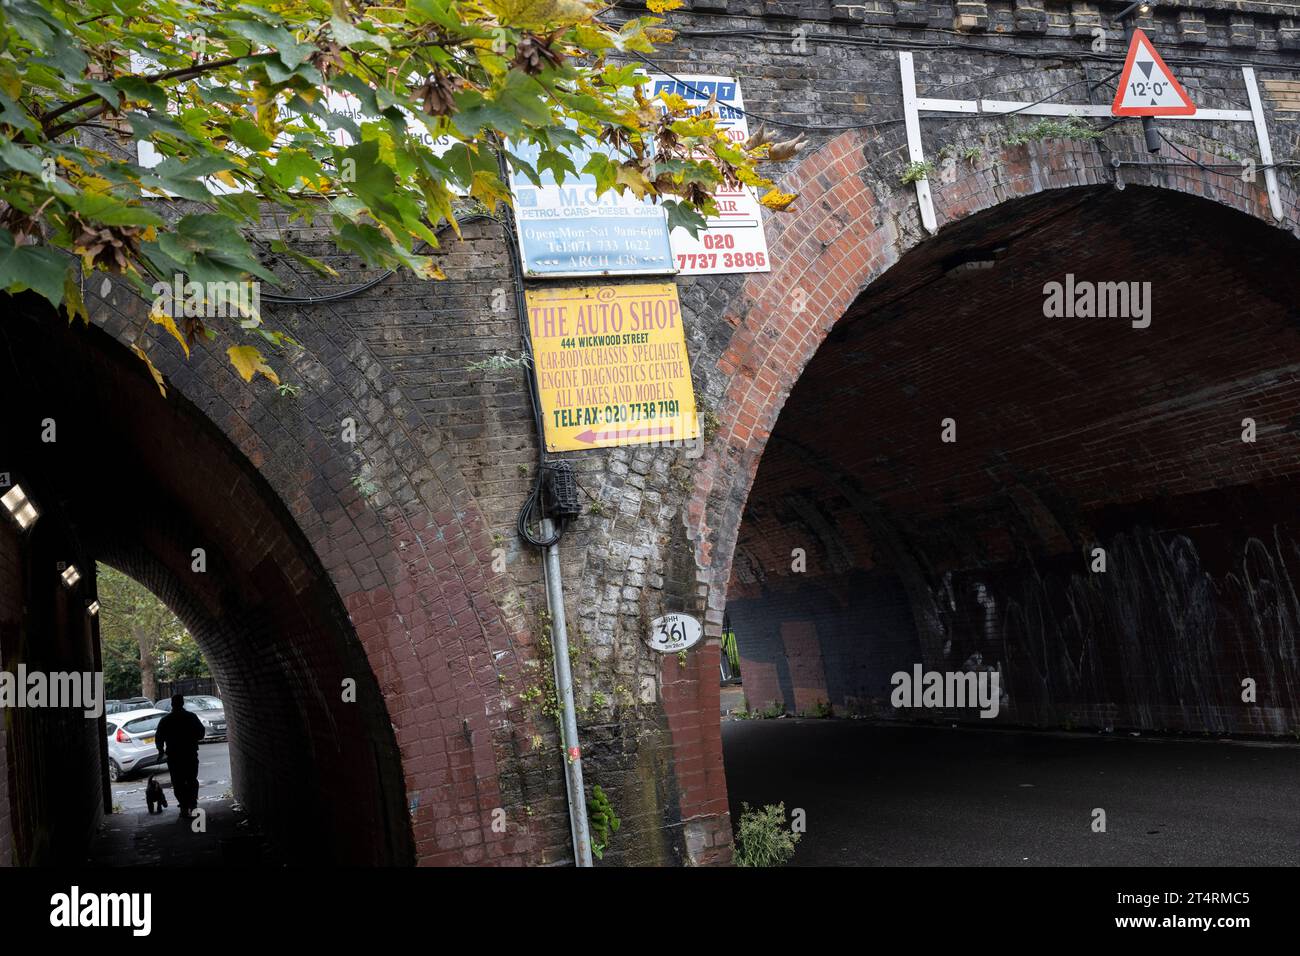 Ads for local businesses are displayed on a railway bridge in Loughborough Junction, on 1st November 2023, in London, England. Loughborough Junction in the south London borough of Lambeth is soon to undergo extensive change and redevelopment as nearby high-rises and flat complexes attracts a younger local Stock Photo